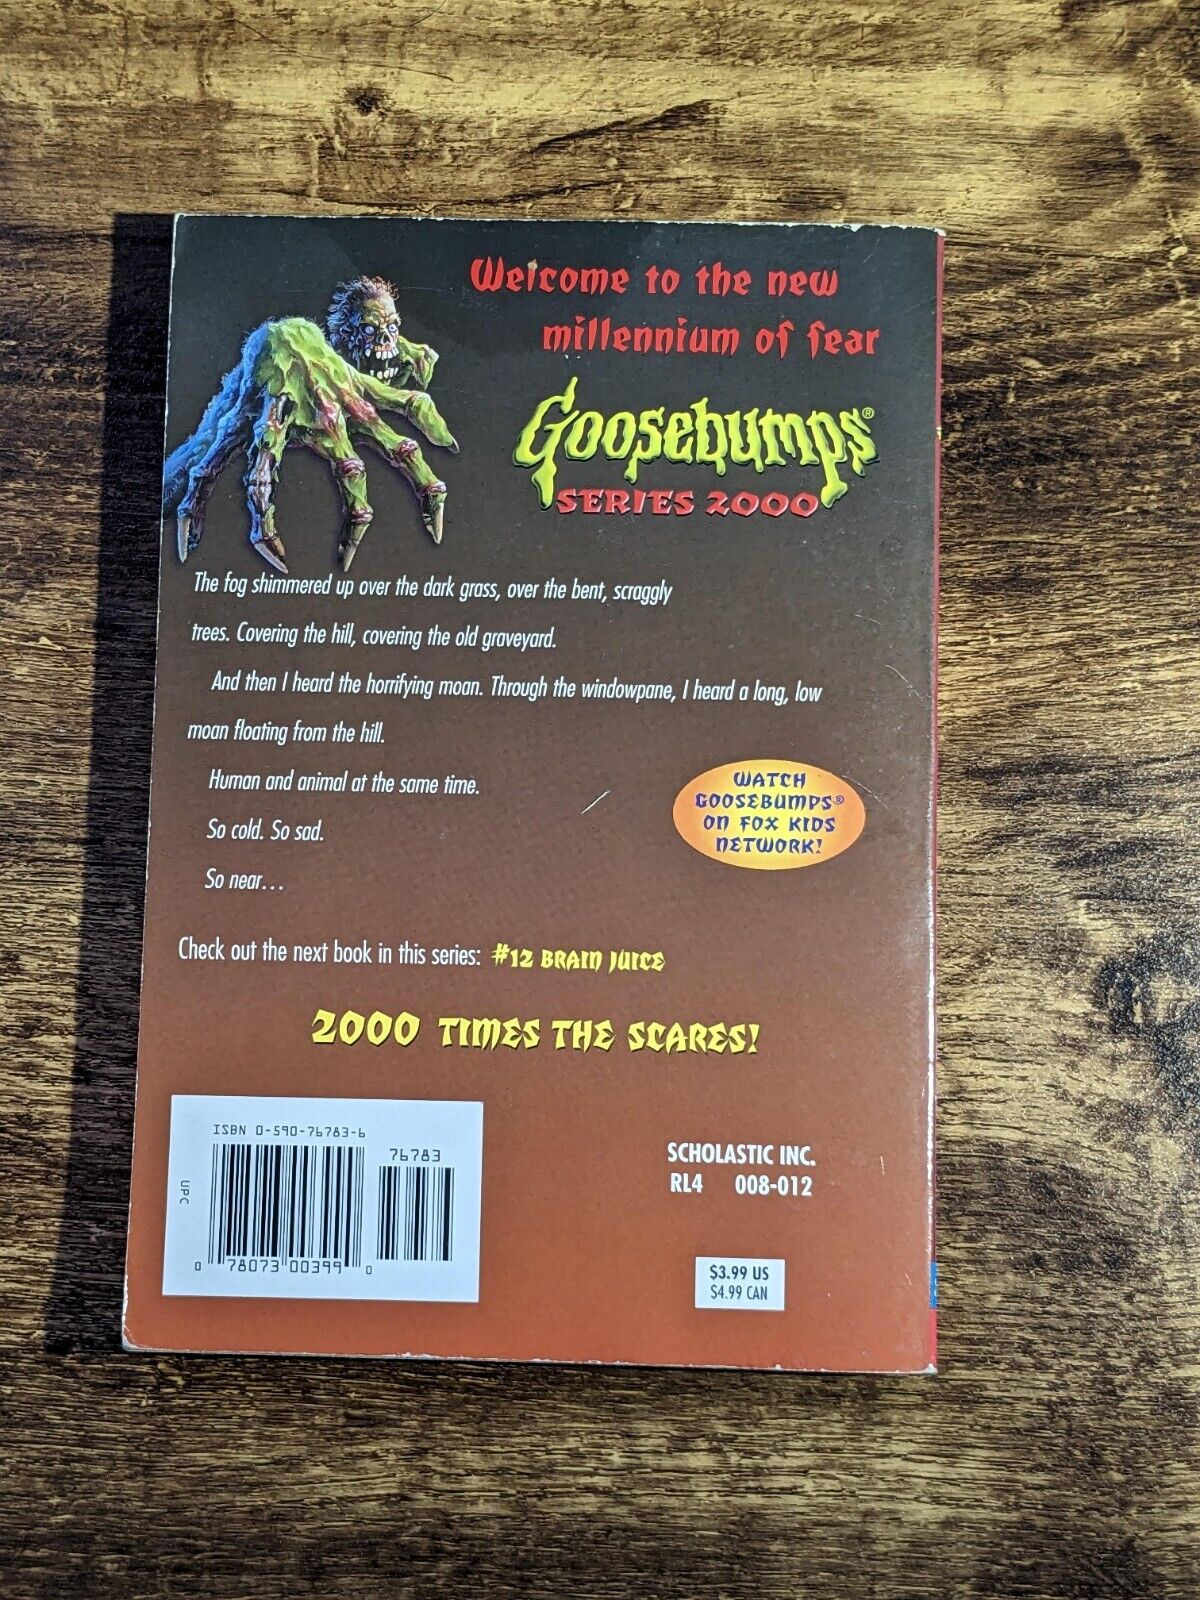 Attack of the Graveyard Ghouls (Goosebumps Series 2000 #11) by R.L. Stine - Asylum Books